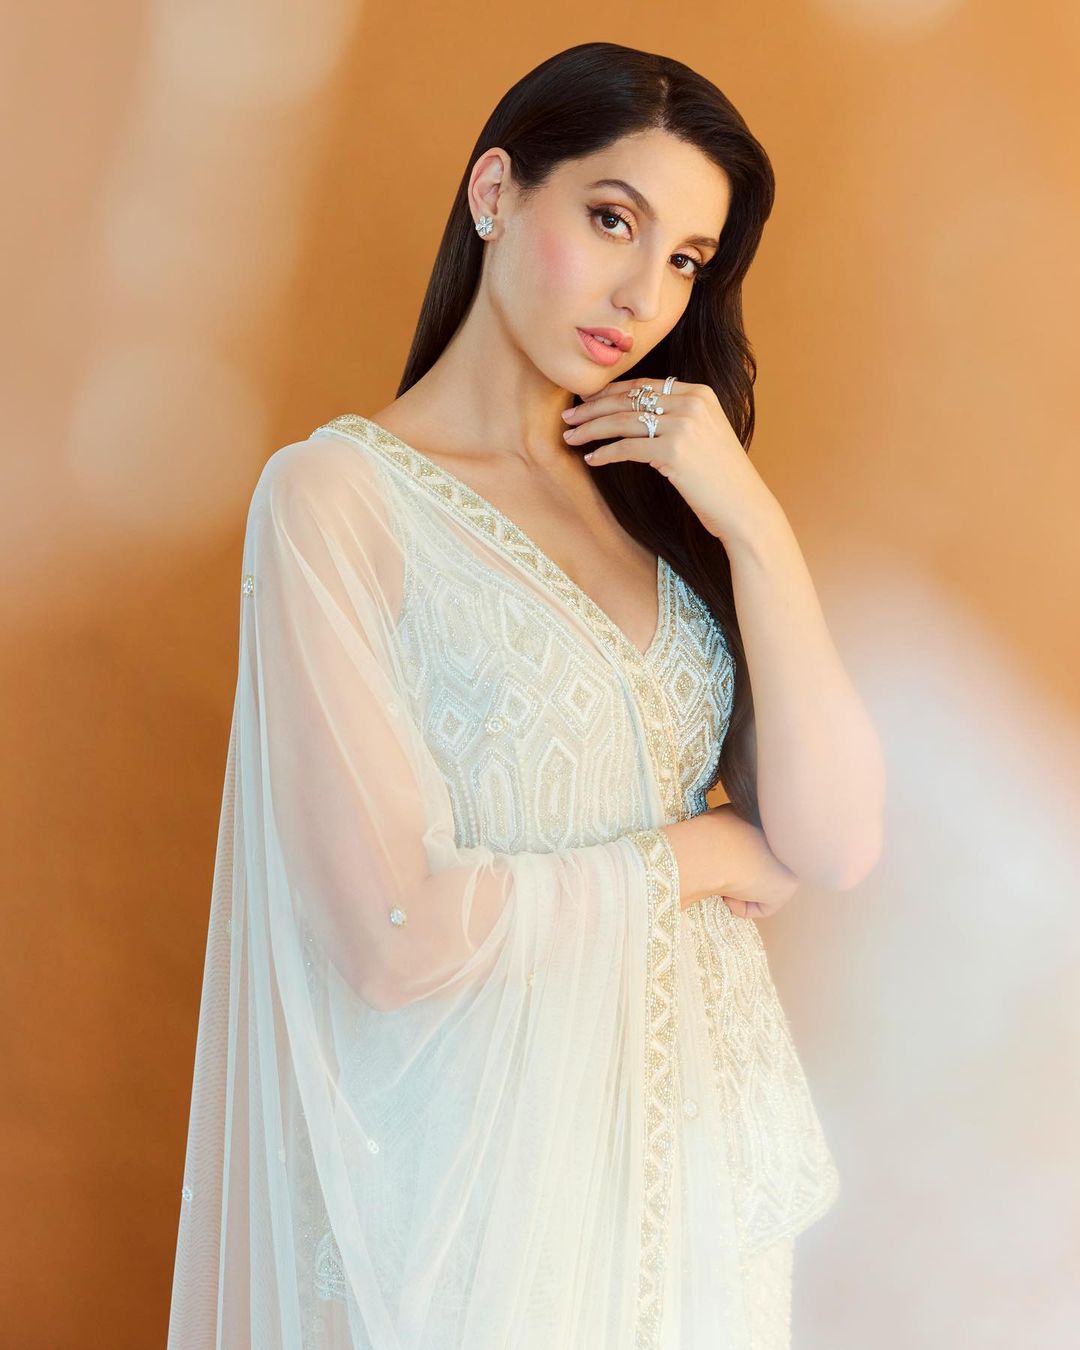 Nora Fatehi is leading the fashion game, see proof 5731